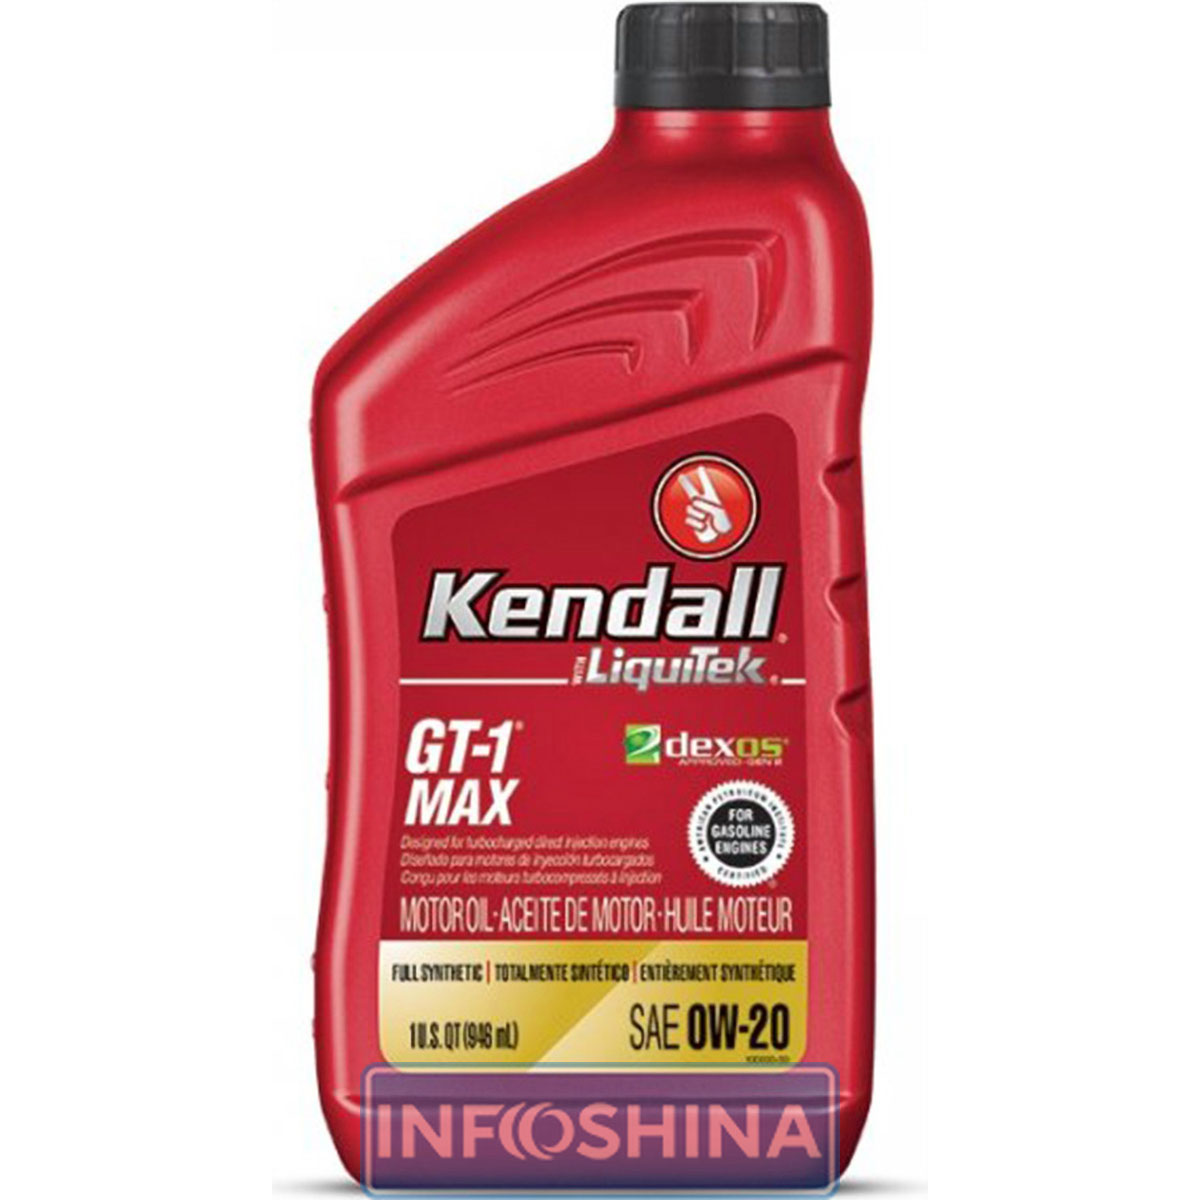 Kendall GT-1 Max Premium Full Synthetic 0W-20